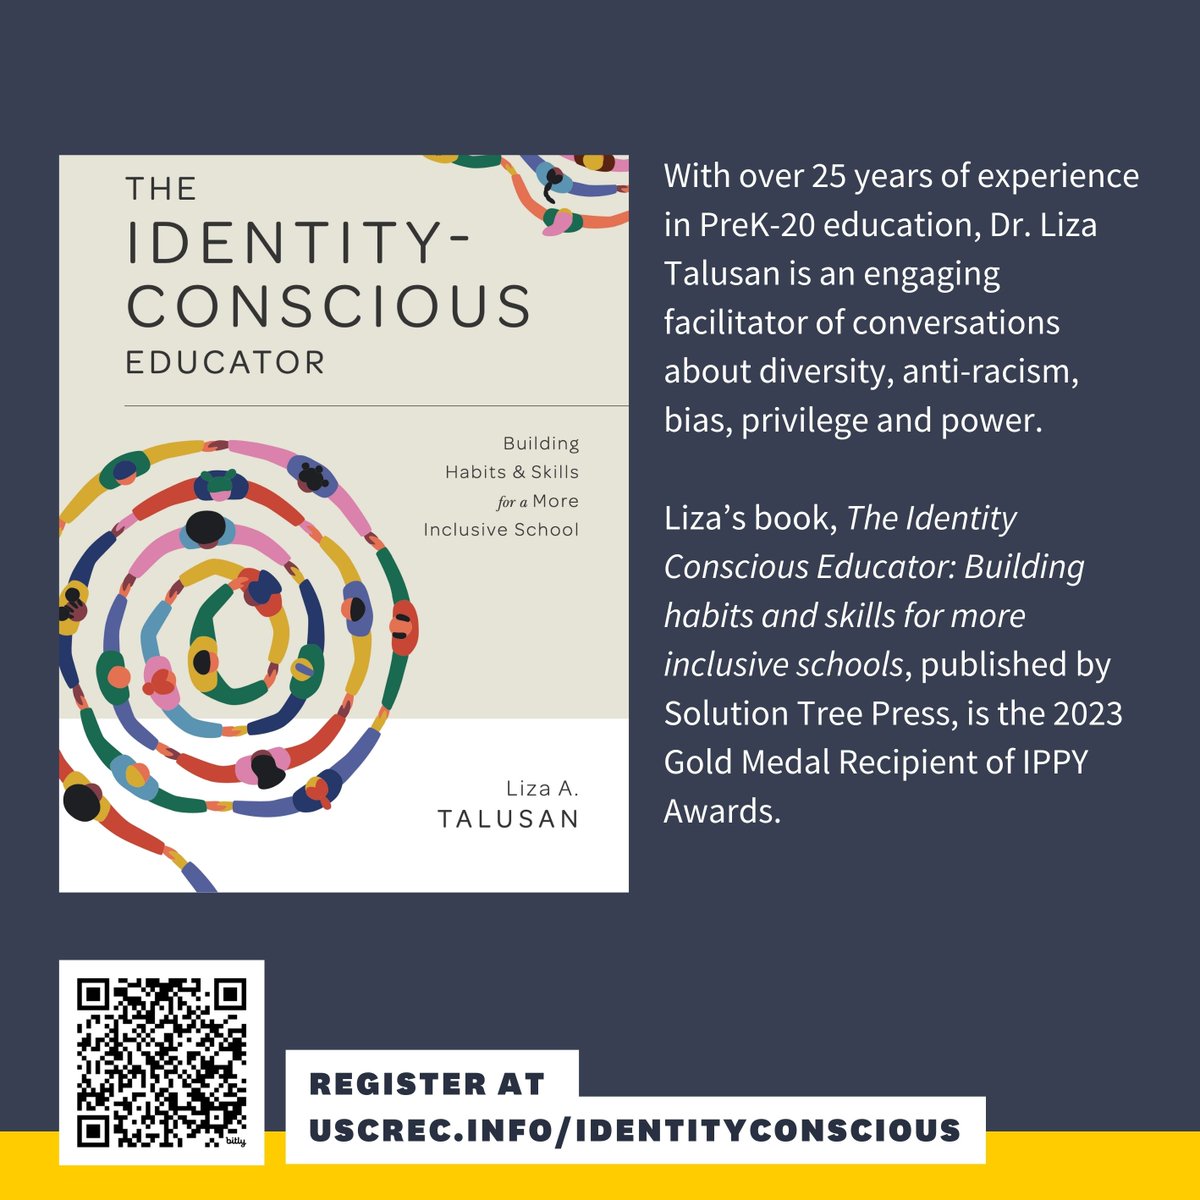 TODAY IS THE DAY! We're launching the first session of our Book Talk Series with Liza Talusan at 4 pm PST. Register here for today: uscrec.info/identityconsci… Make sure to also save the date for April 29 & June 3 for the next sessions with Ali Michael & Toby Jenkins!